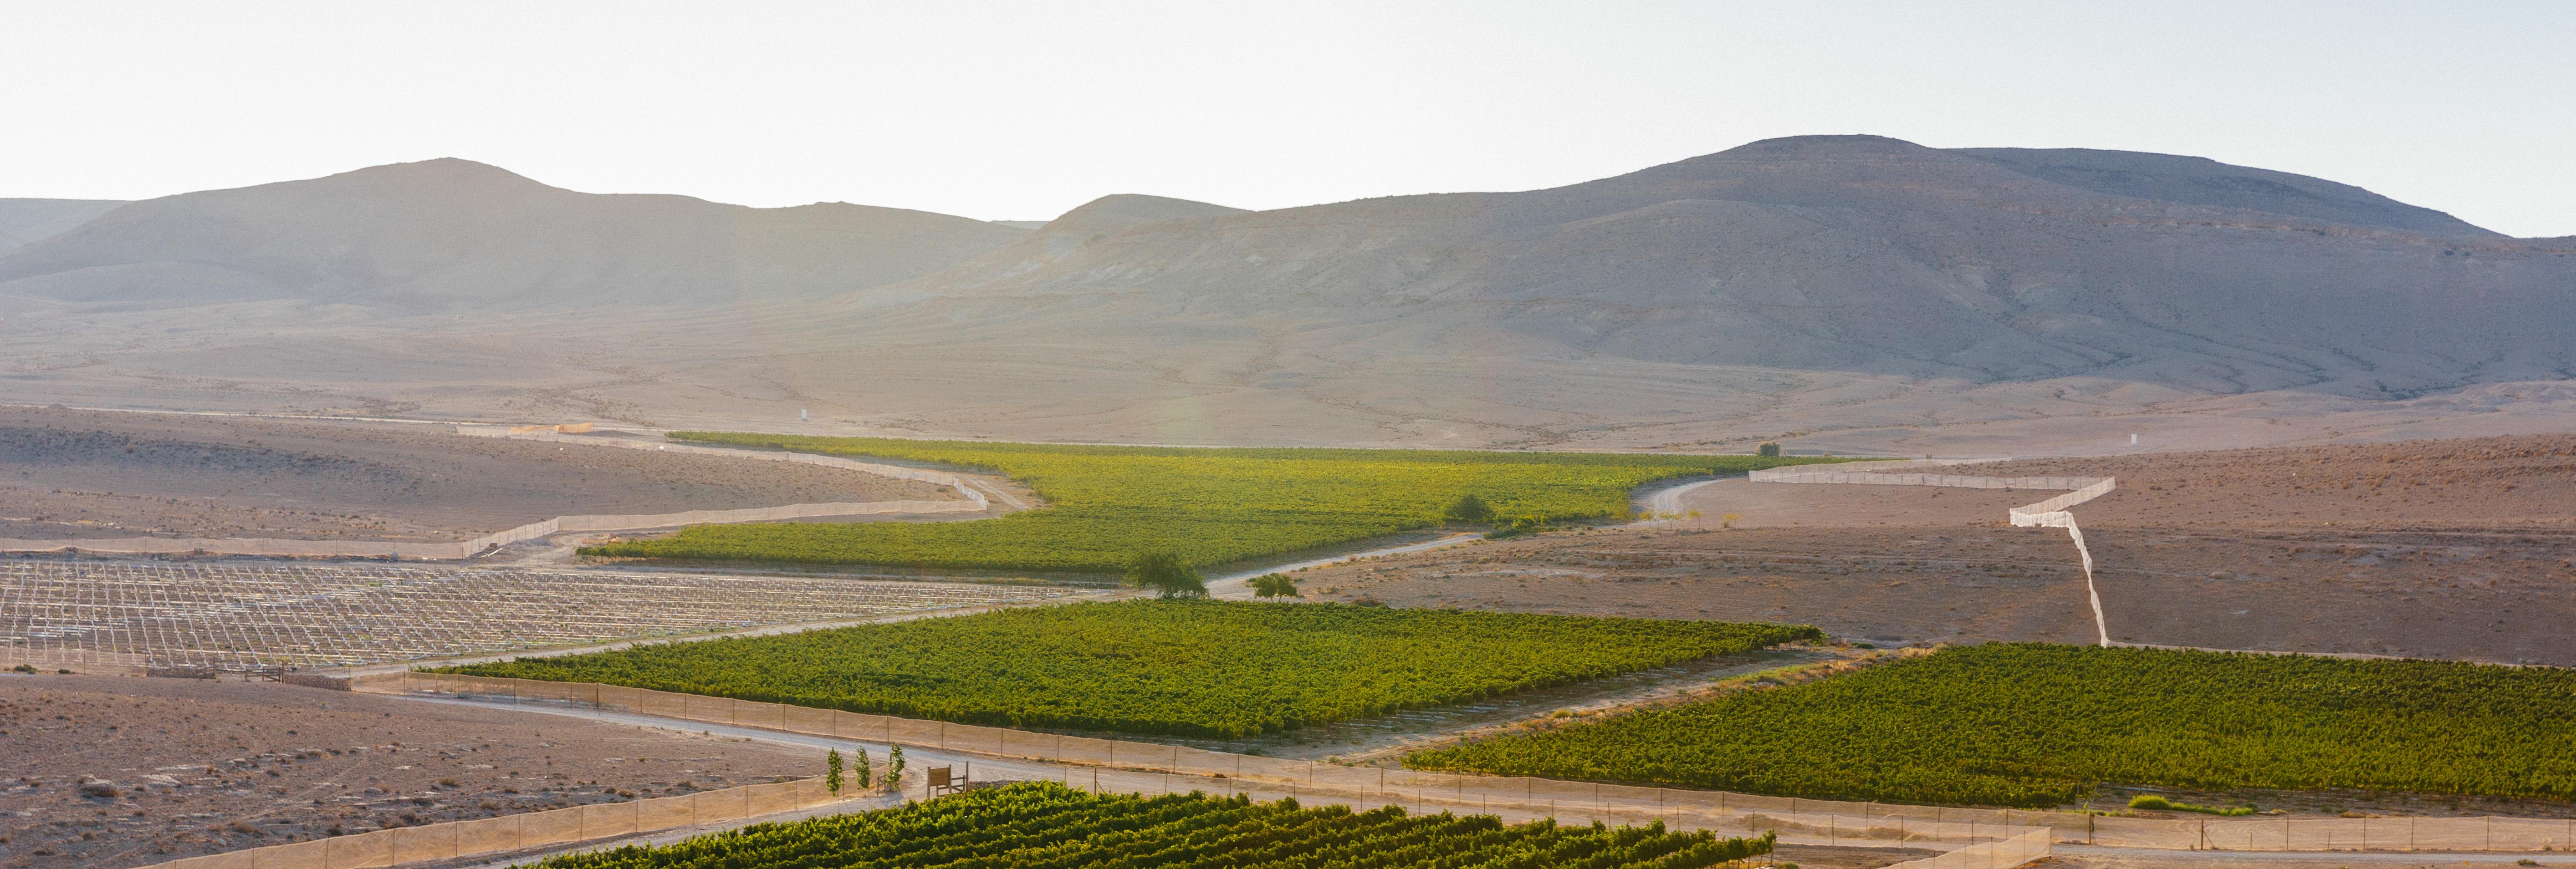 Why Wines From Israel's Negev Desert May Represent the Future of ...